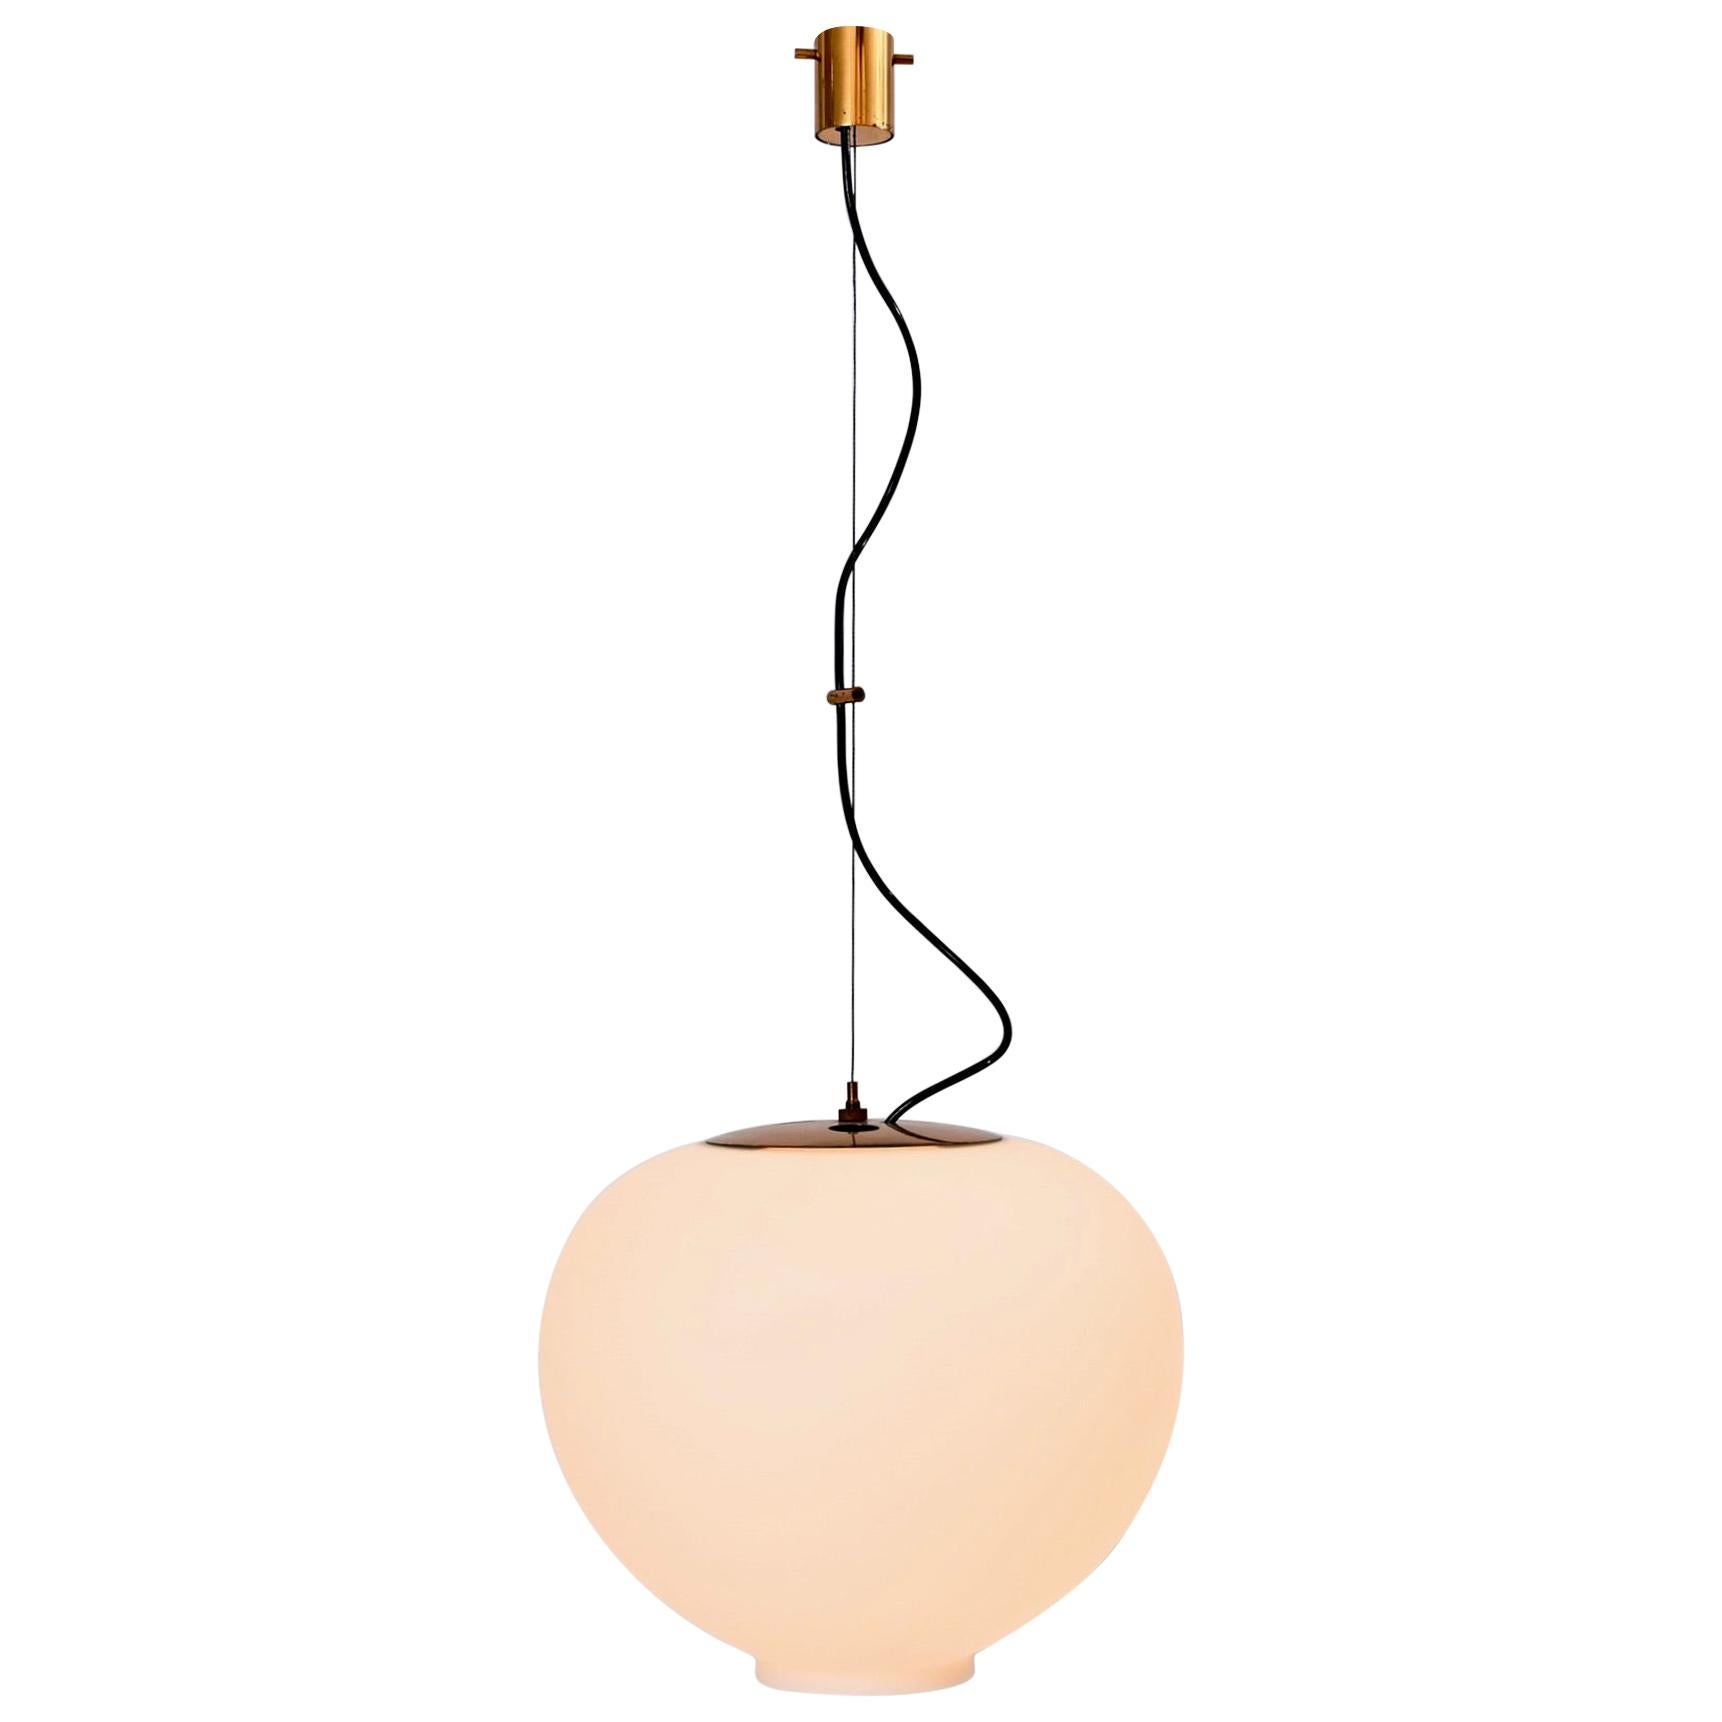 Wire-Suspended Opaline Glass Ceiling Pendant by Stilnovo, Italy, circa 1955